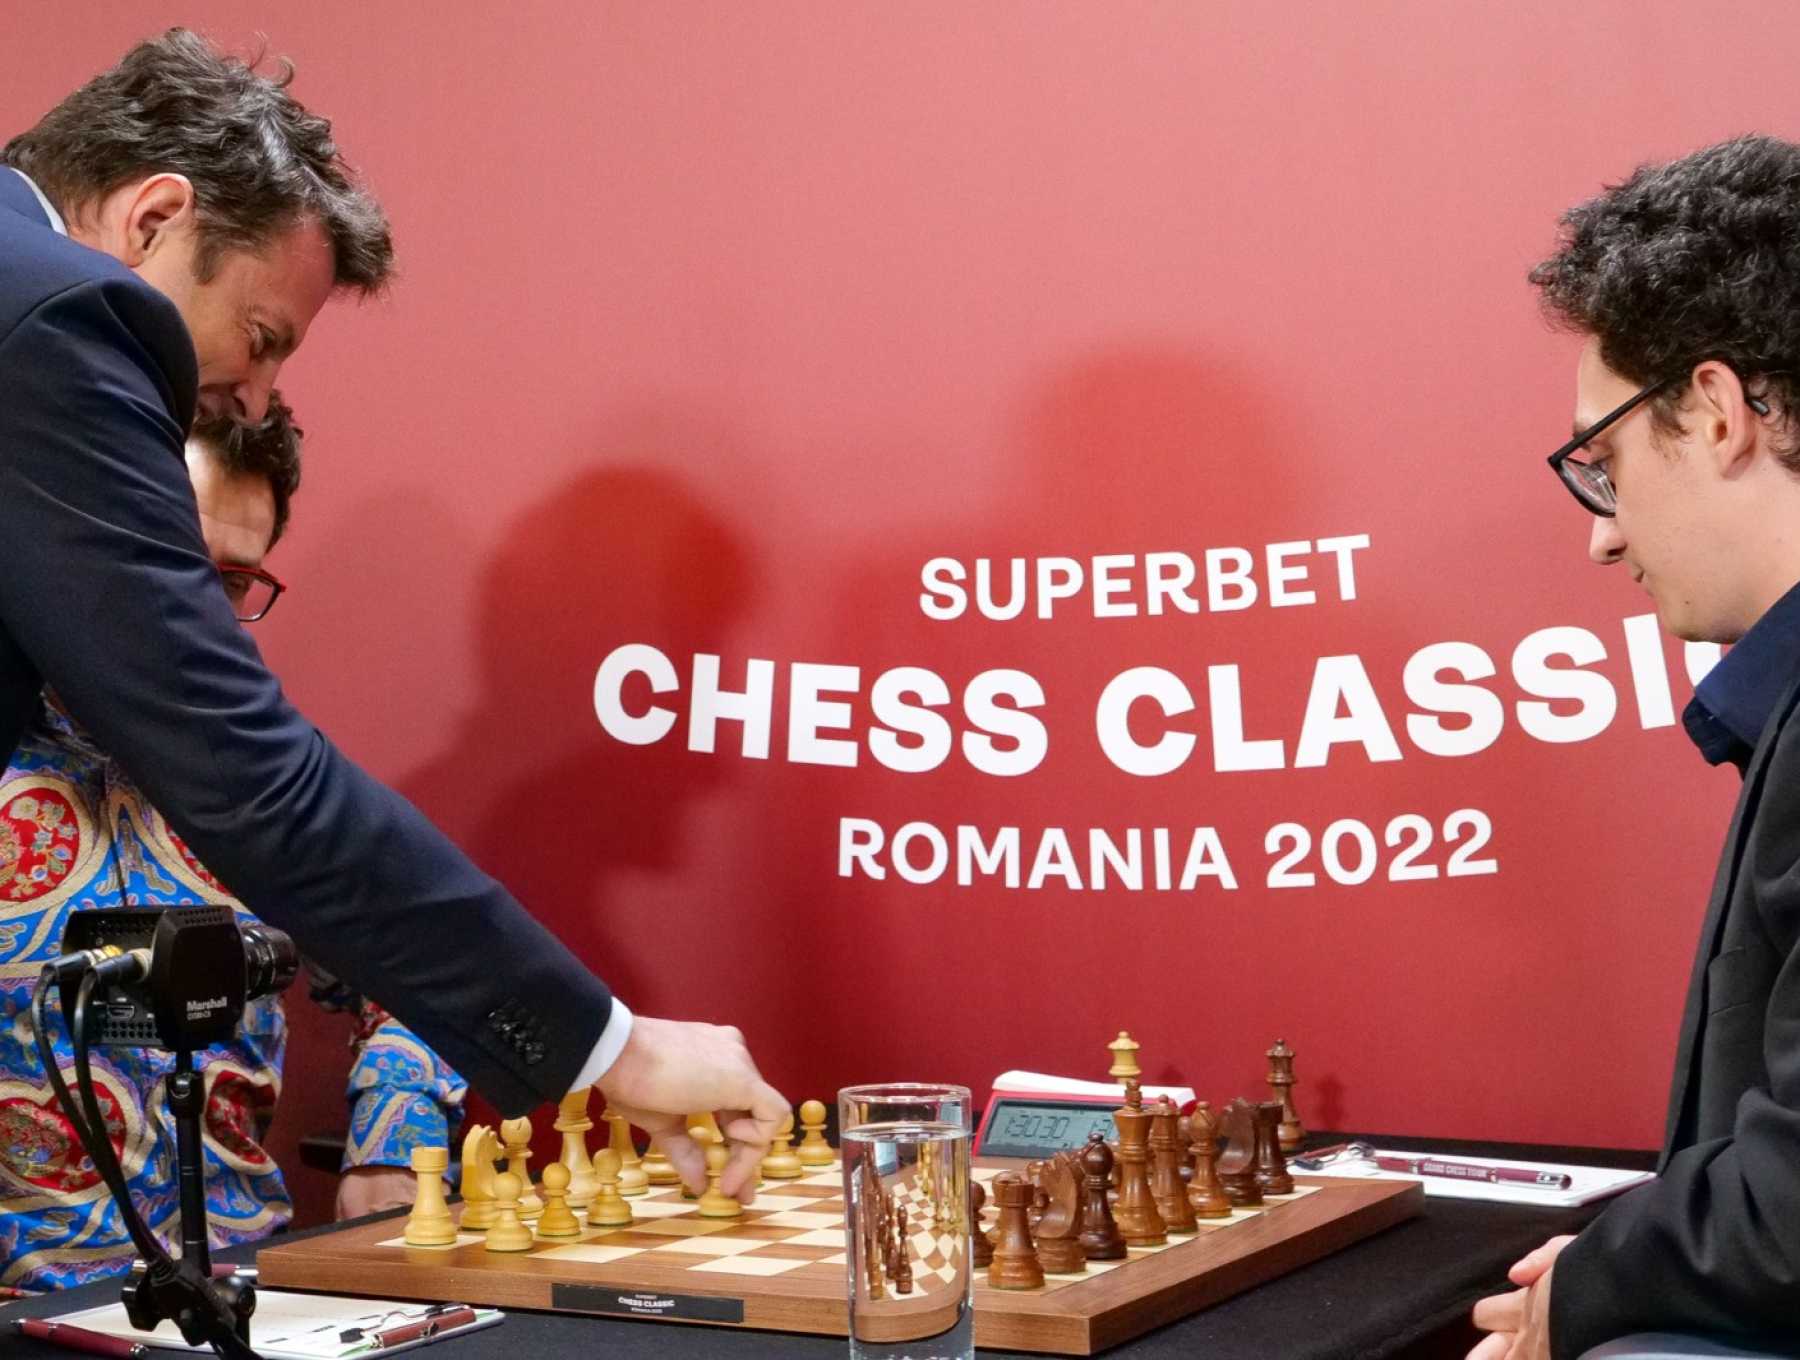 Andrei Diaconescu made the ceremonial first move at Superbet Chess Classic Romania 2022, an event with outstanding personalities from the world of chess